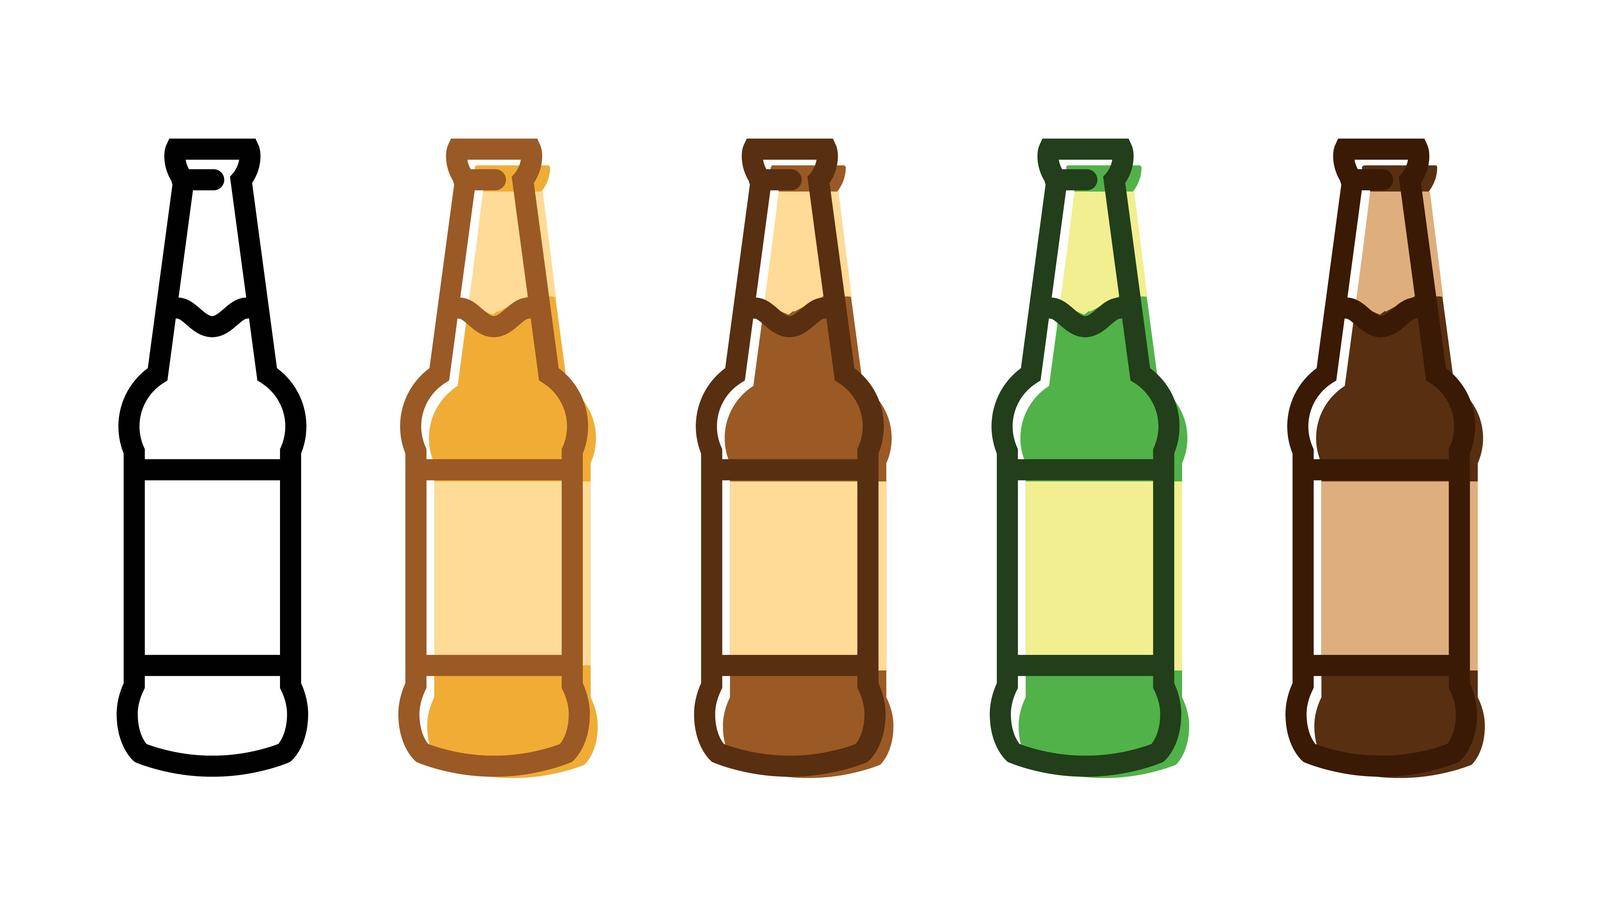 Set of a Beer Bottle icon set by macroarting